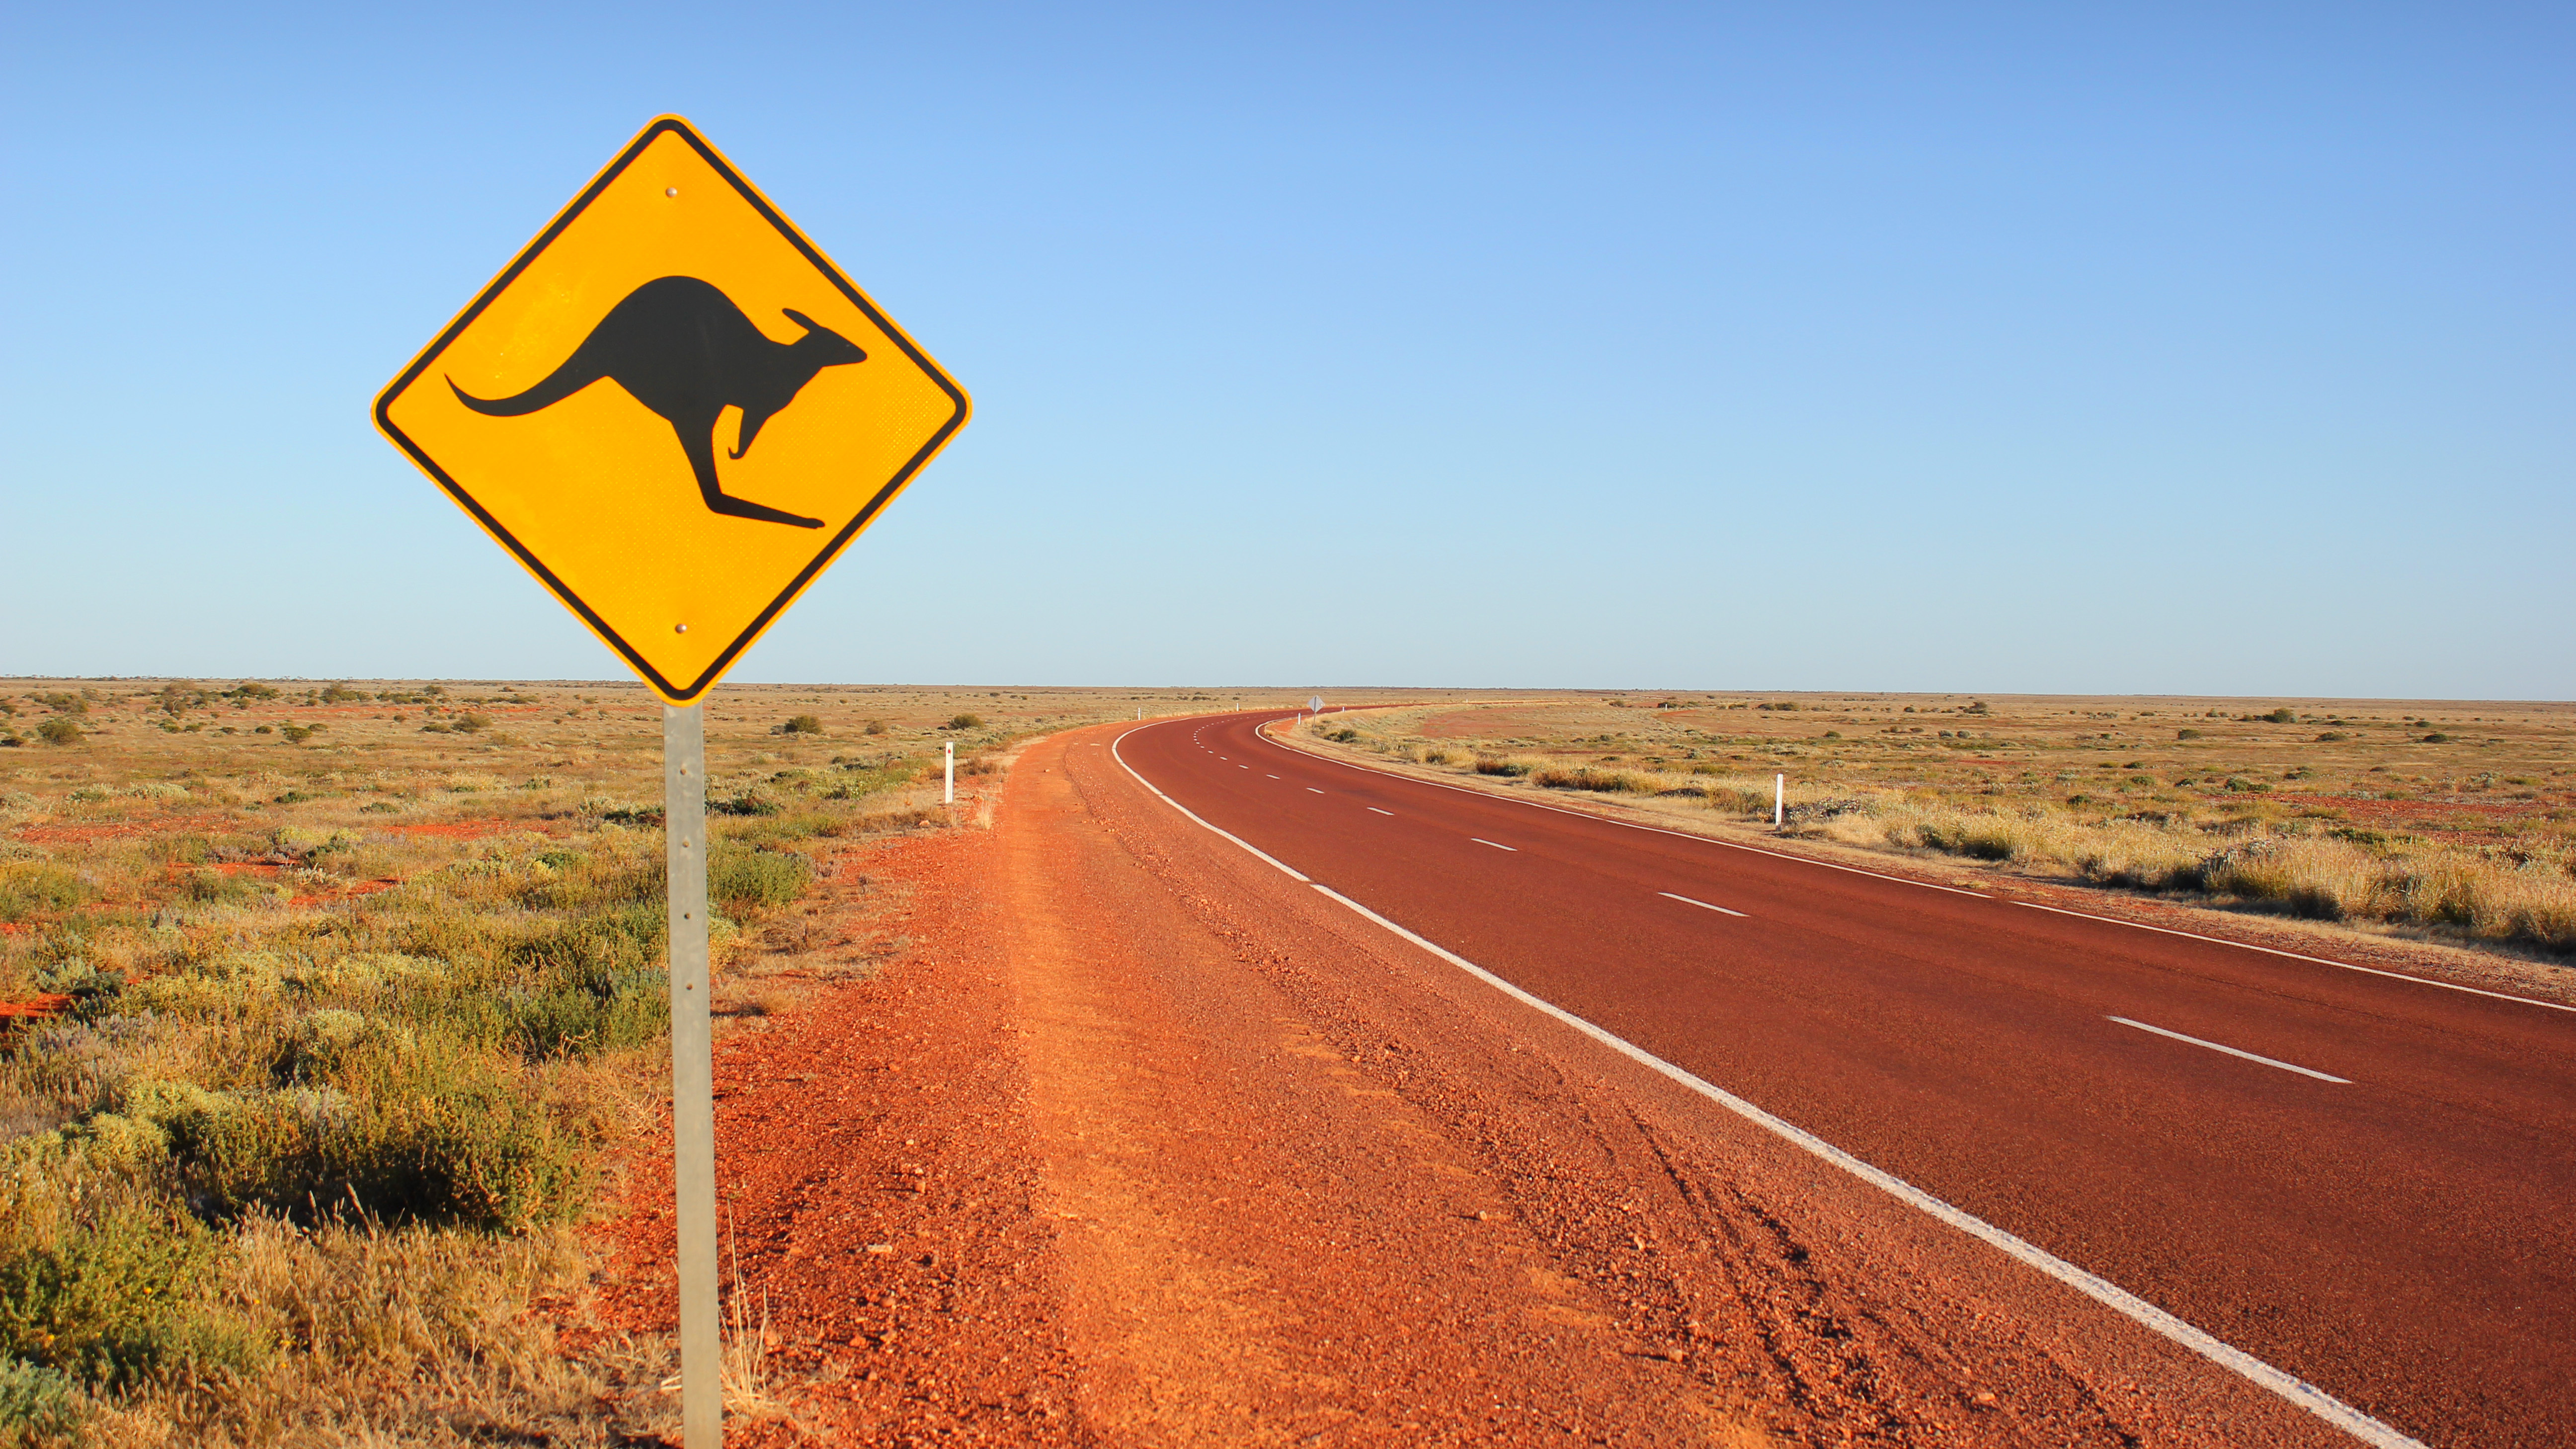 Aussie outlook outback sign with kangaroo